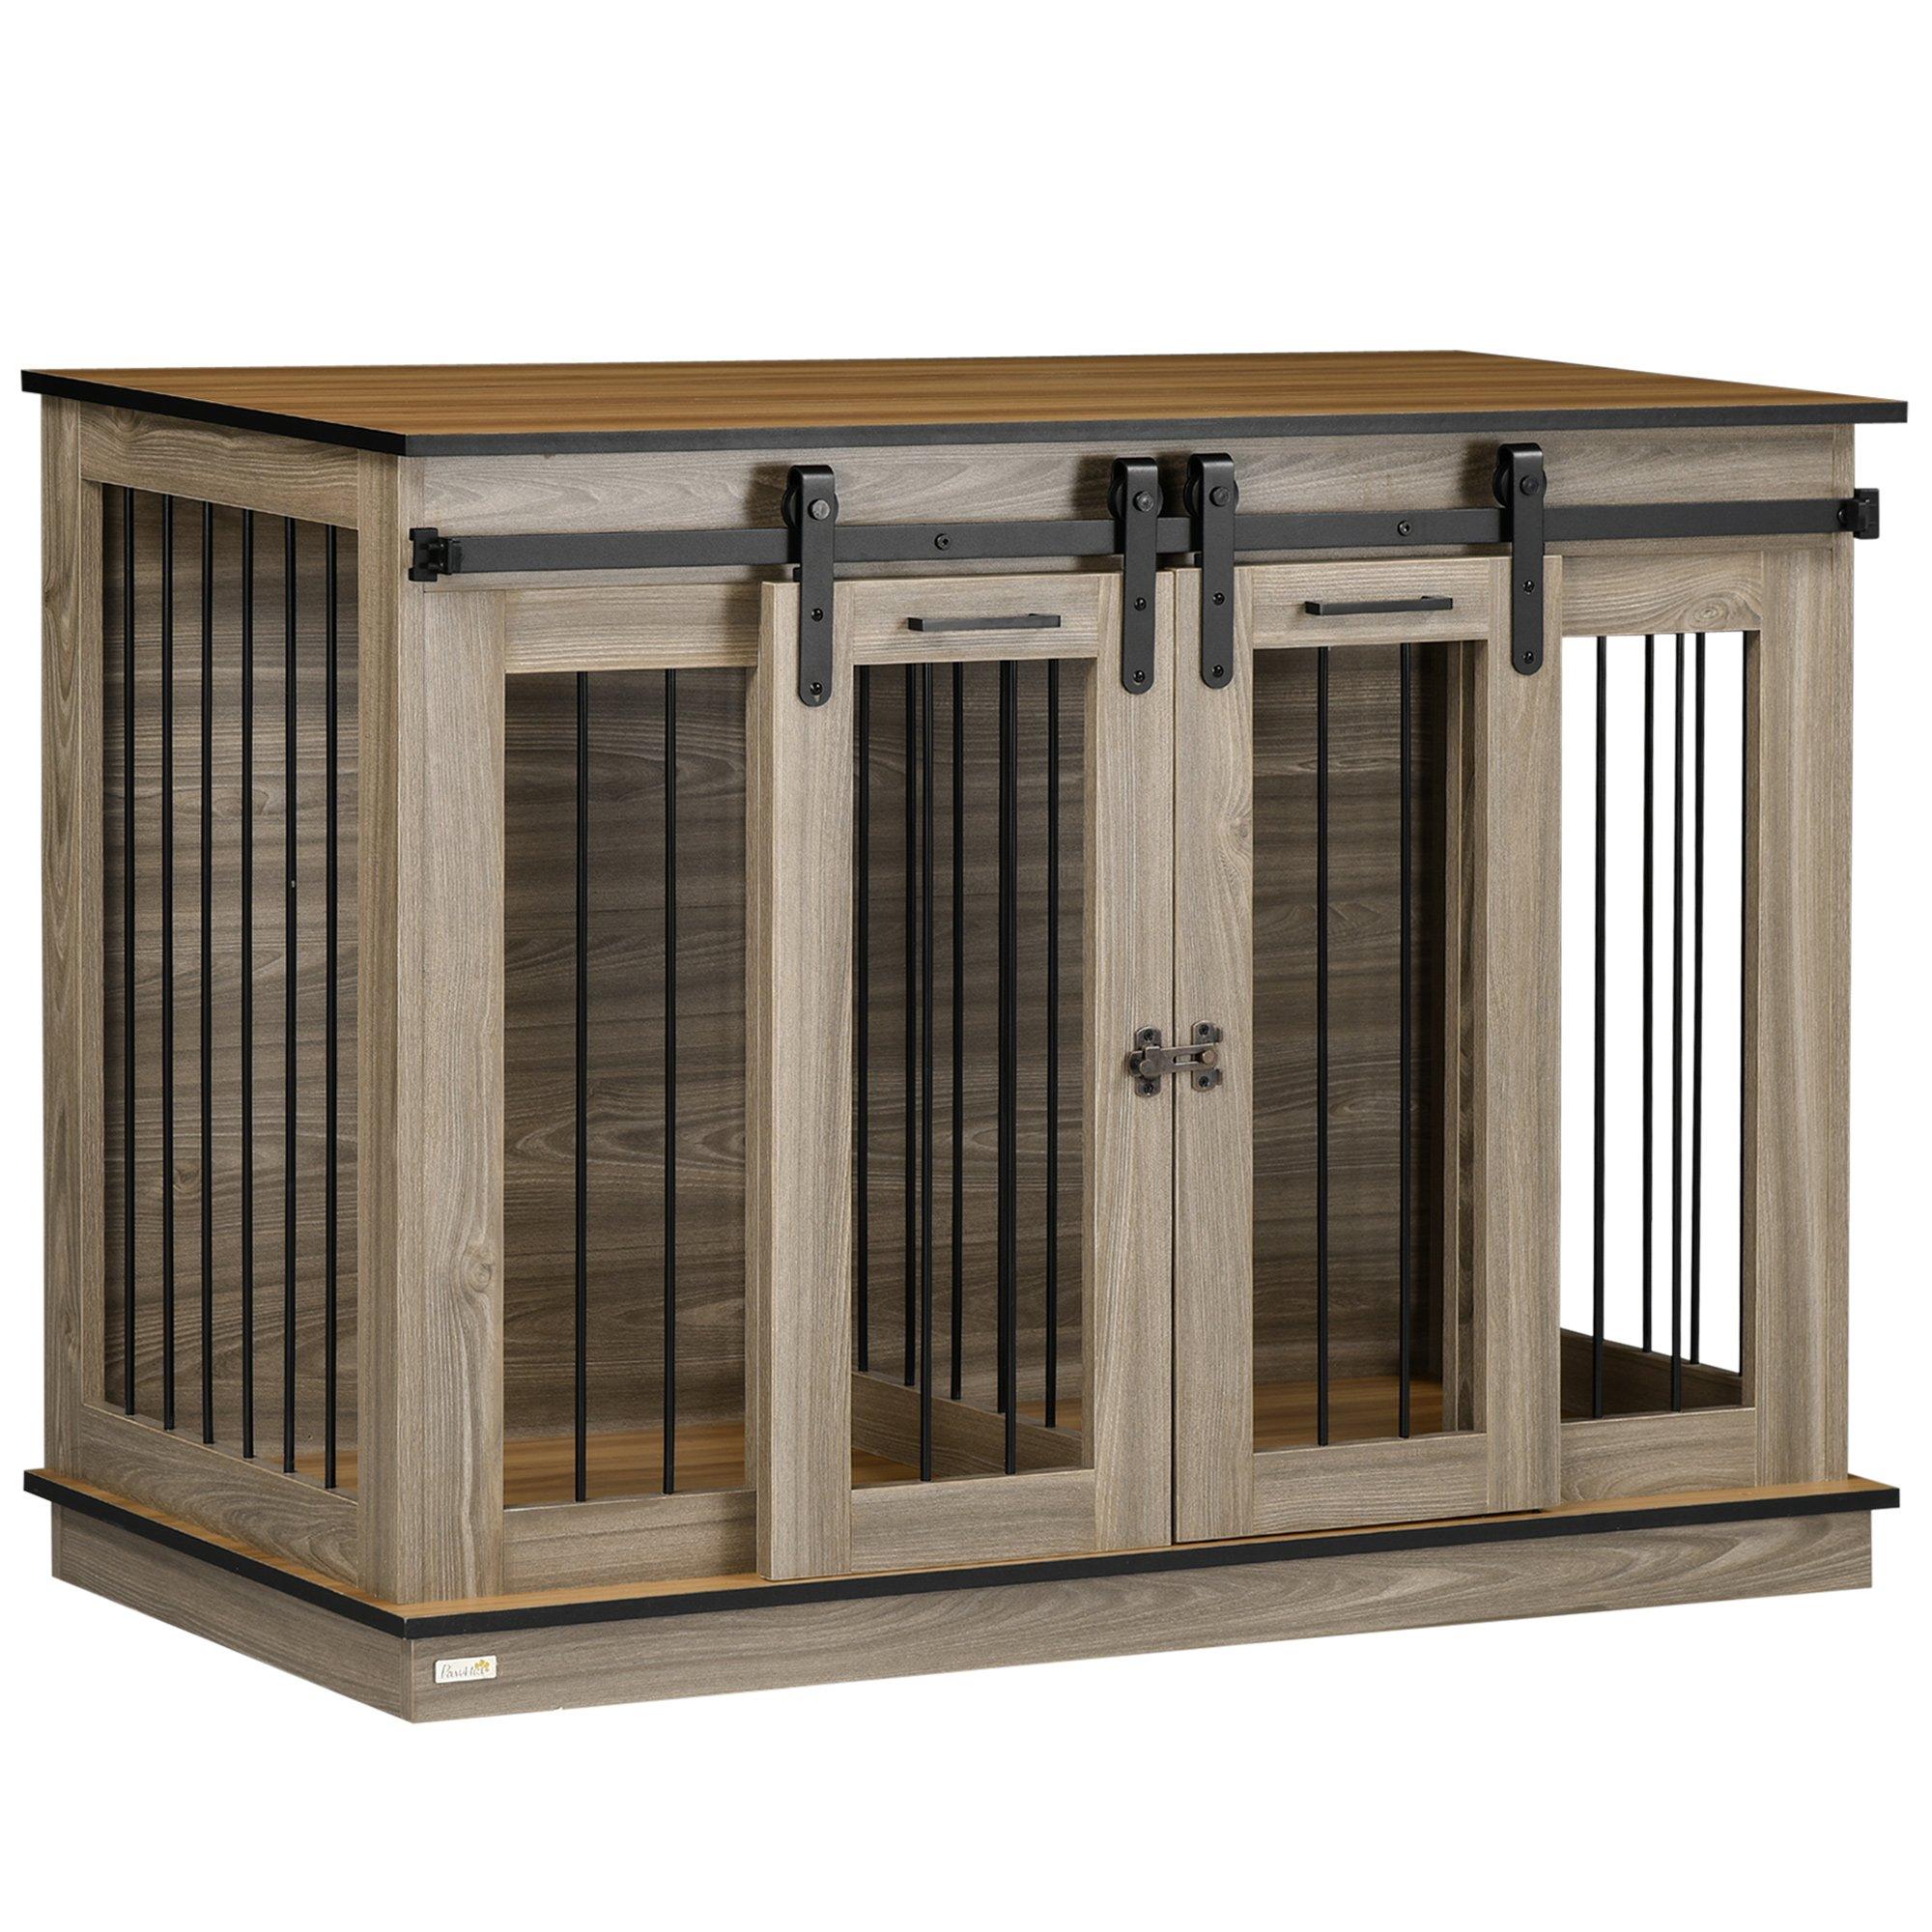 Dog Crate Furniture for Large Dog, Double Dog Cage for Small Dogs with Divider